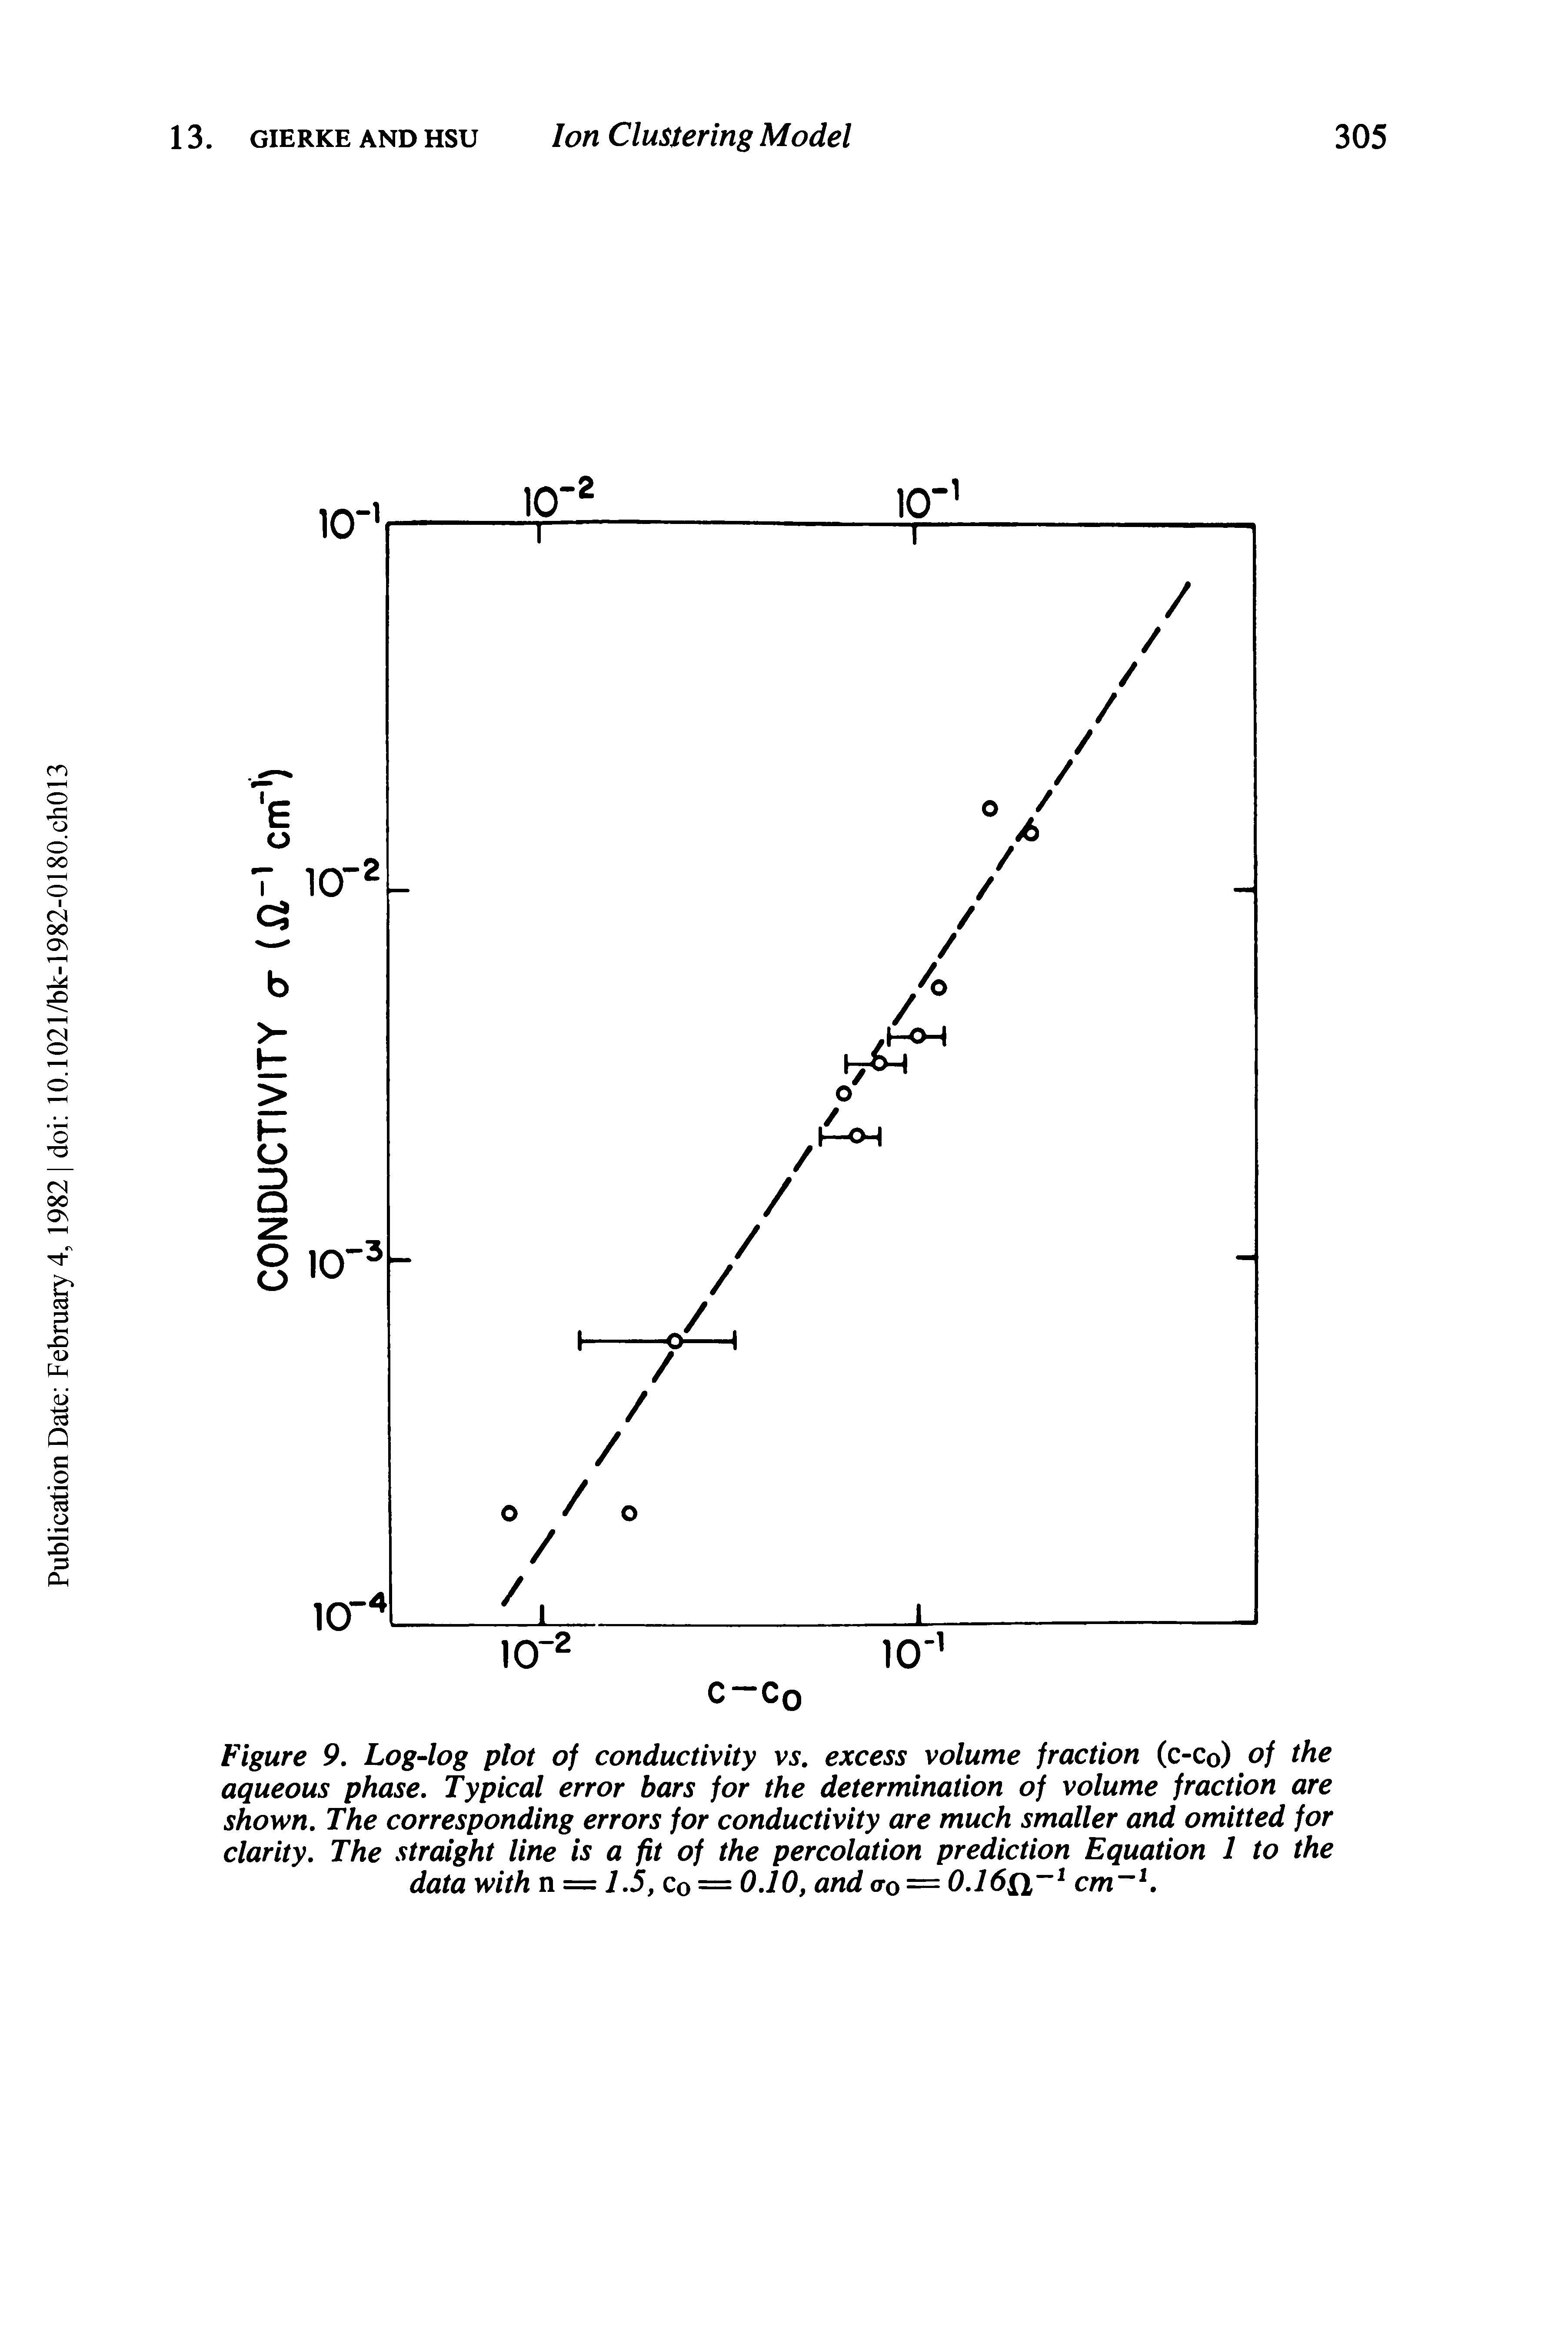 Figure 9. Log-log plot of conductivity vs. excess volume fraction (c-Co) of the aqueous phase. Typical error bars for the determination of volume fraction are shown. The corresponding errors for conductivity are much smaller and omitted for clarity. The straight line is a fit of the percolation prediction Equation 1 to the data with n = 1.5, Co = 0.10, and <ro = 0.16ft-1 cm-1.